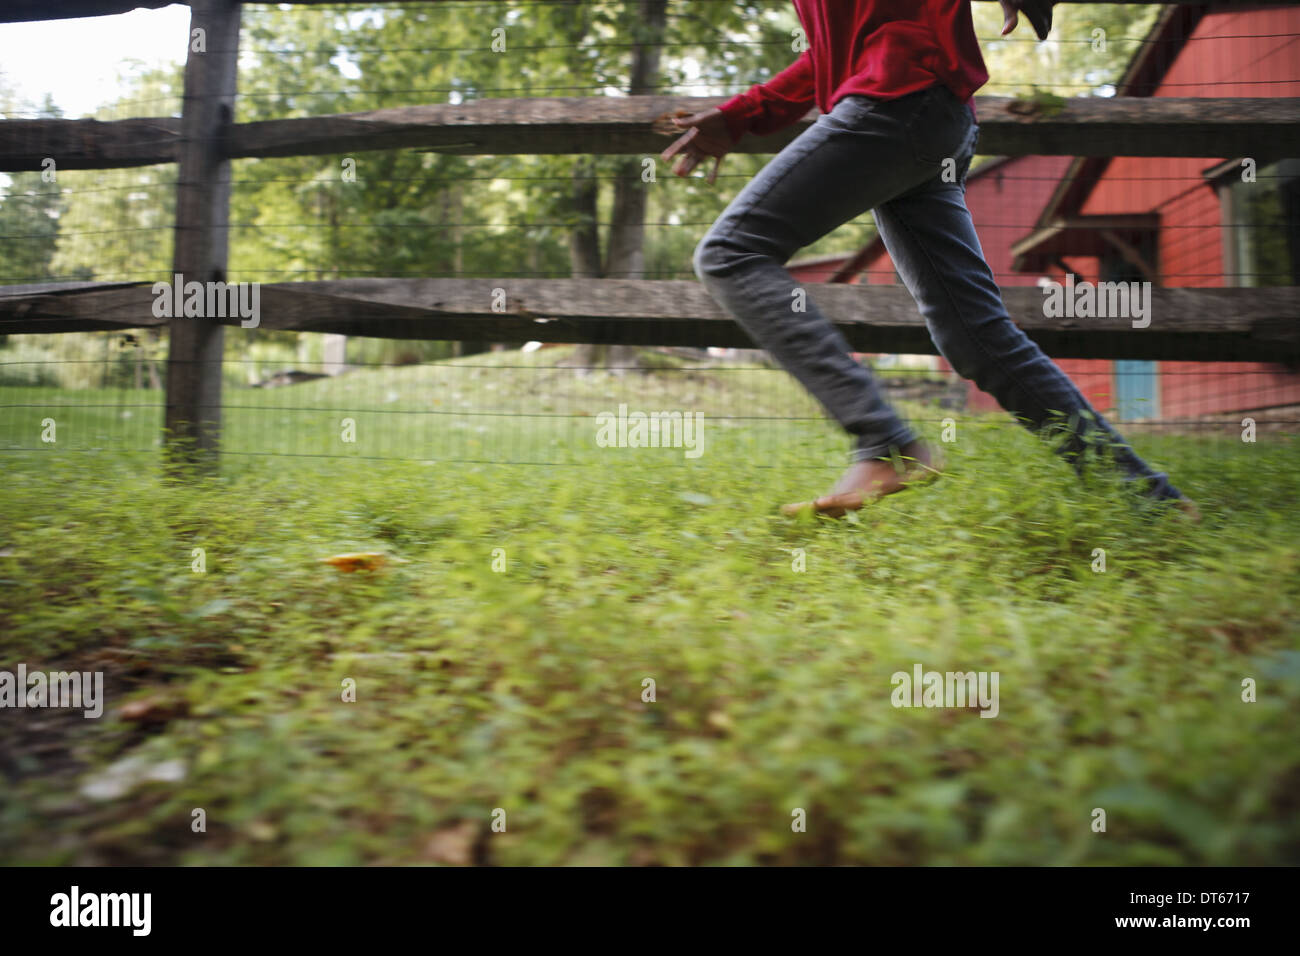 A boy running around a paddock fence outdoors. Stock Photo